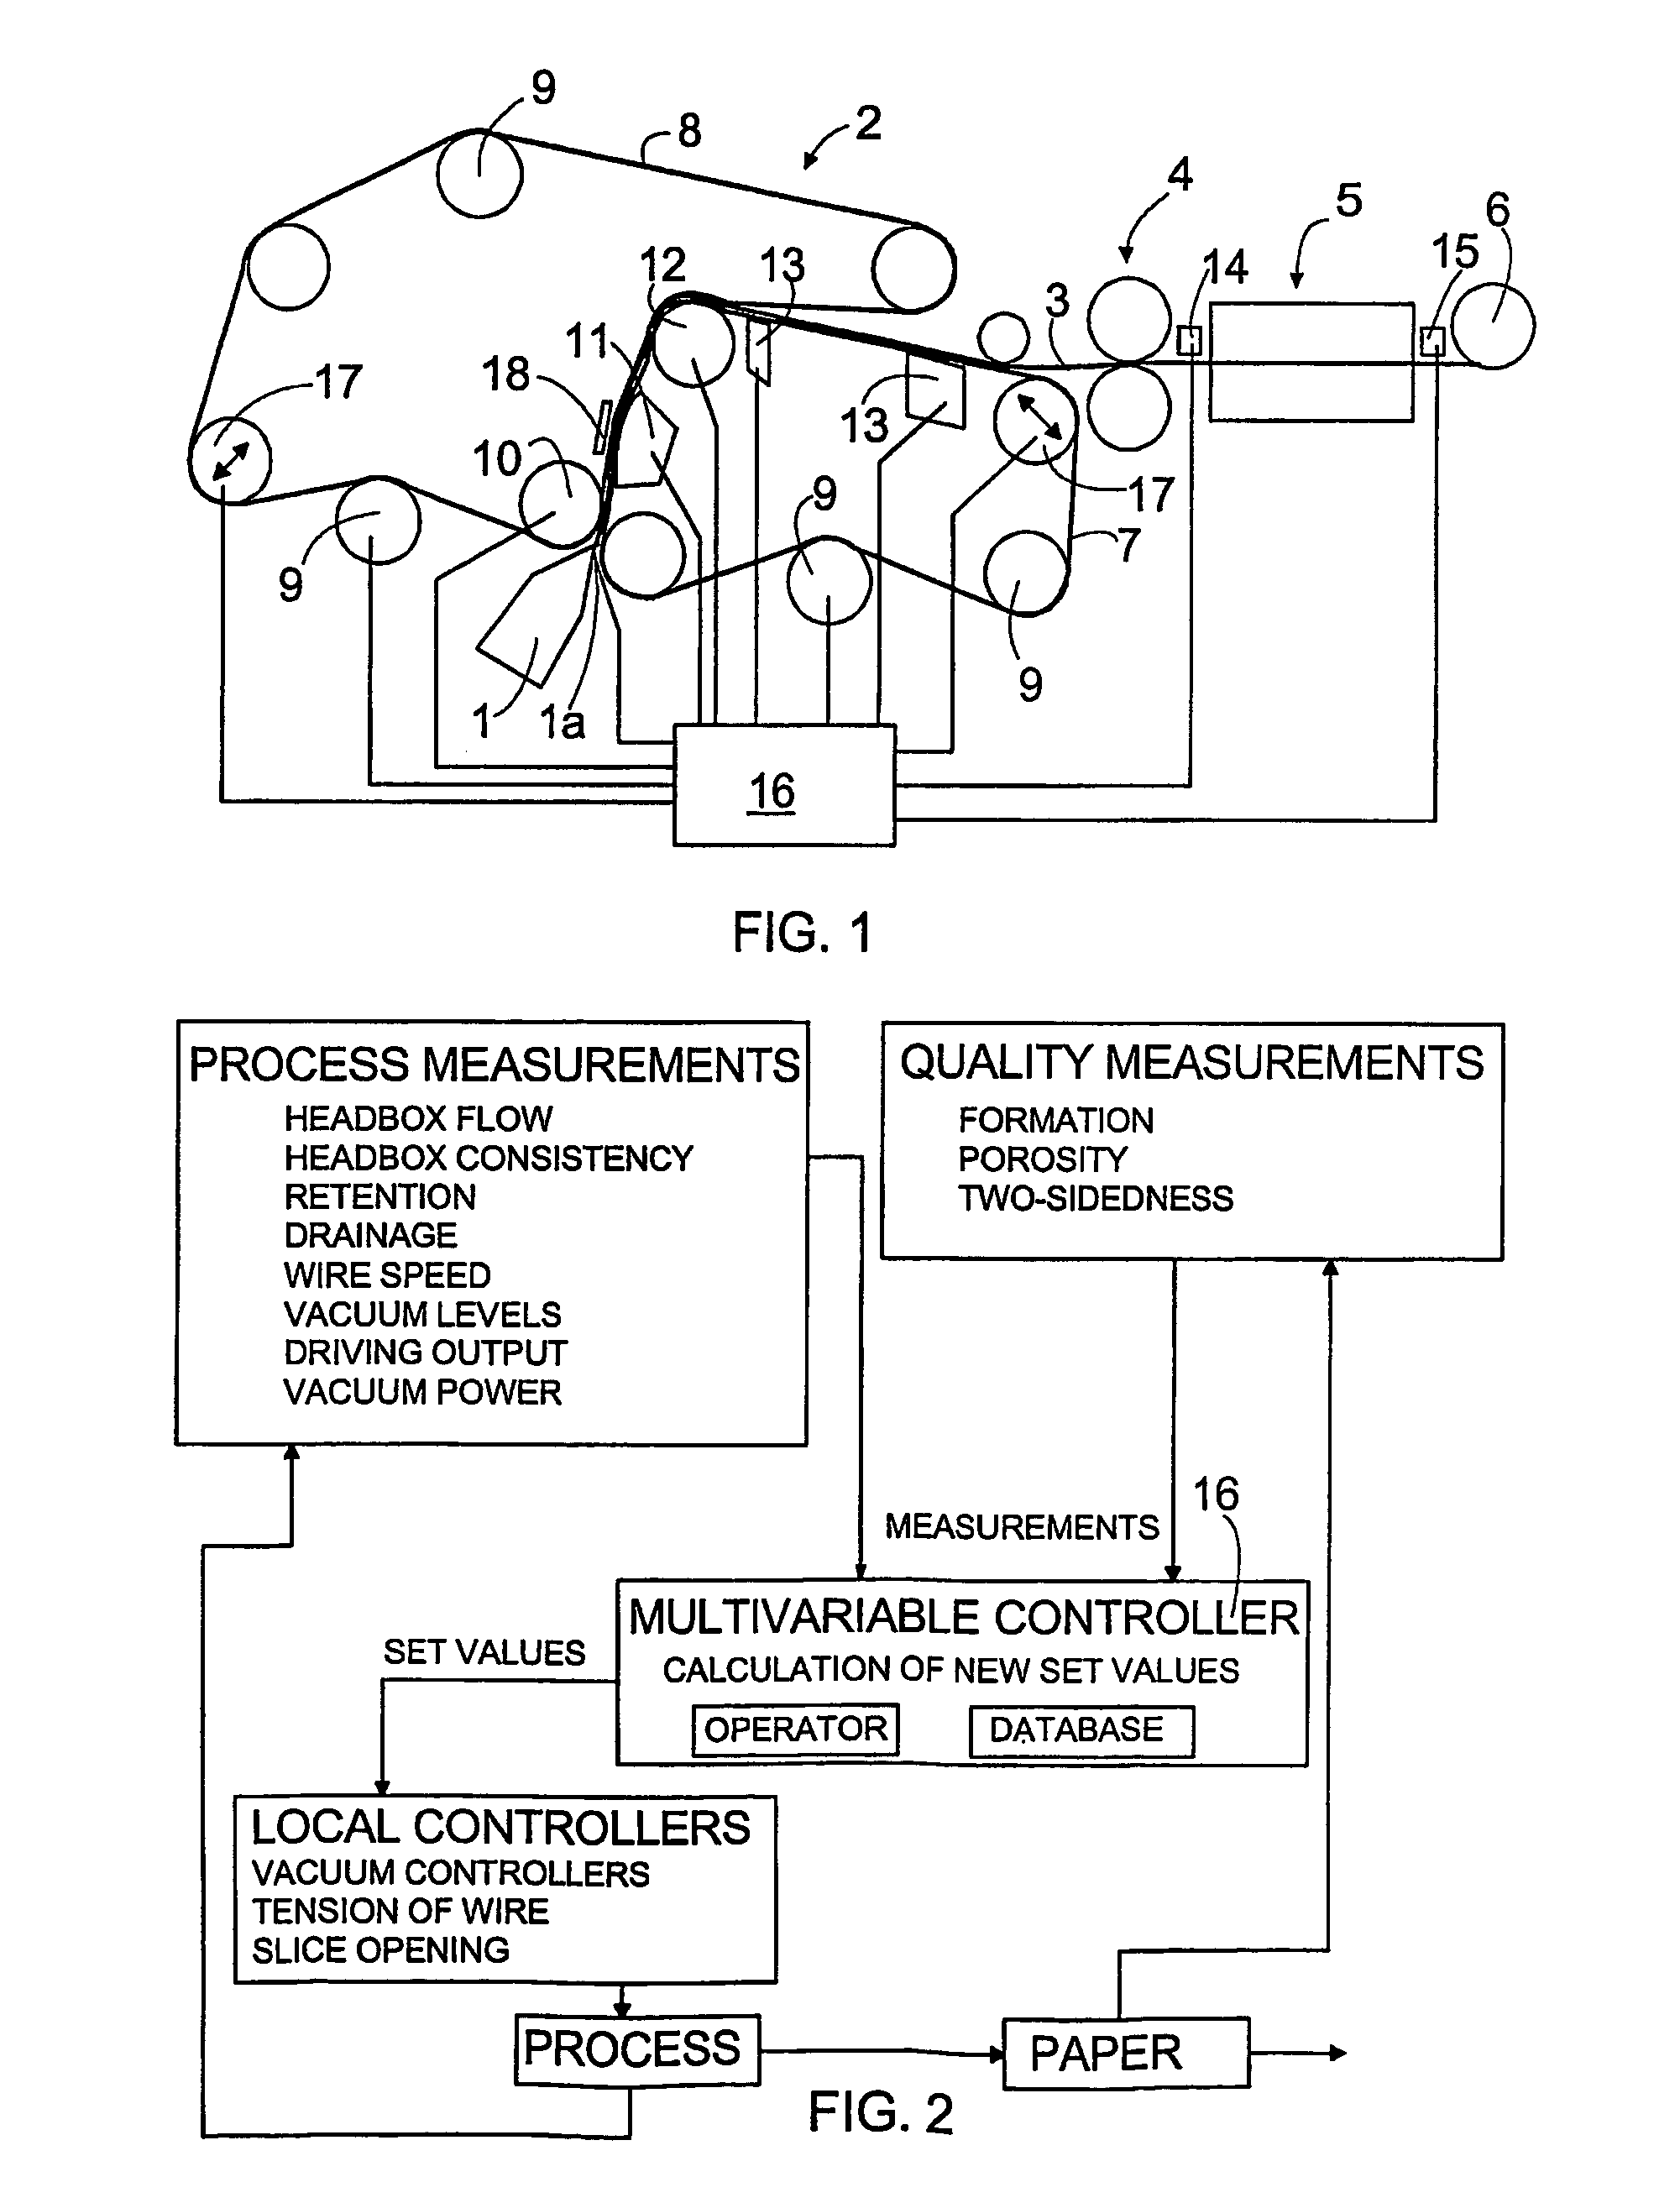 Method and apparatus for adjusting operation of wire section